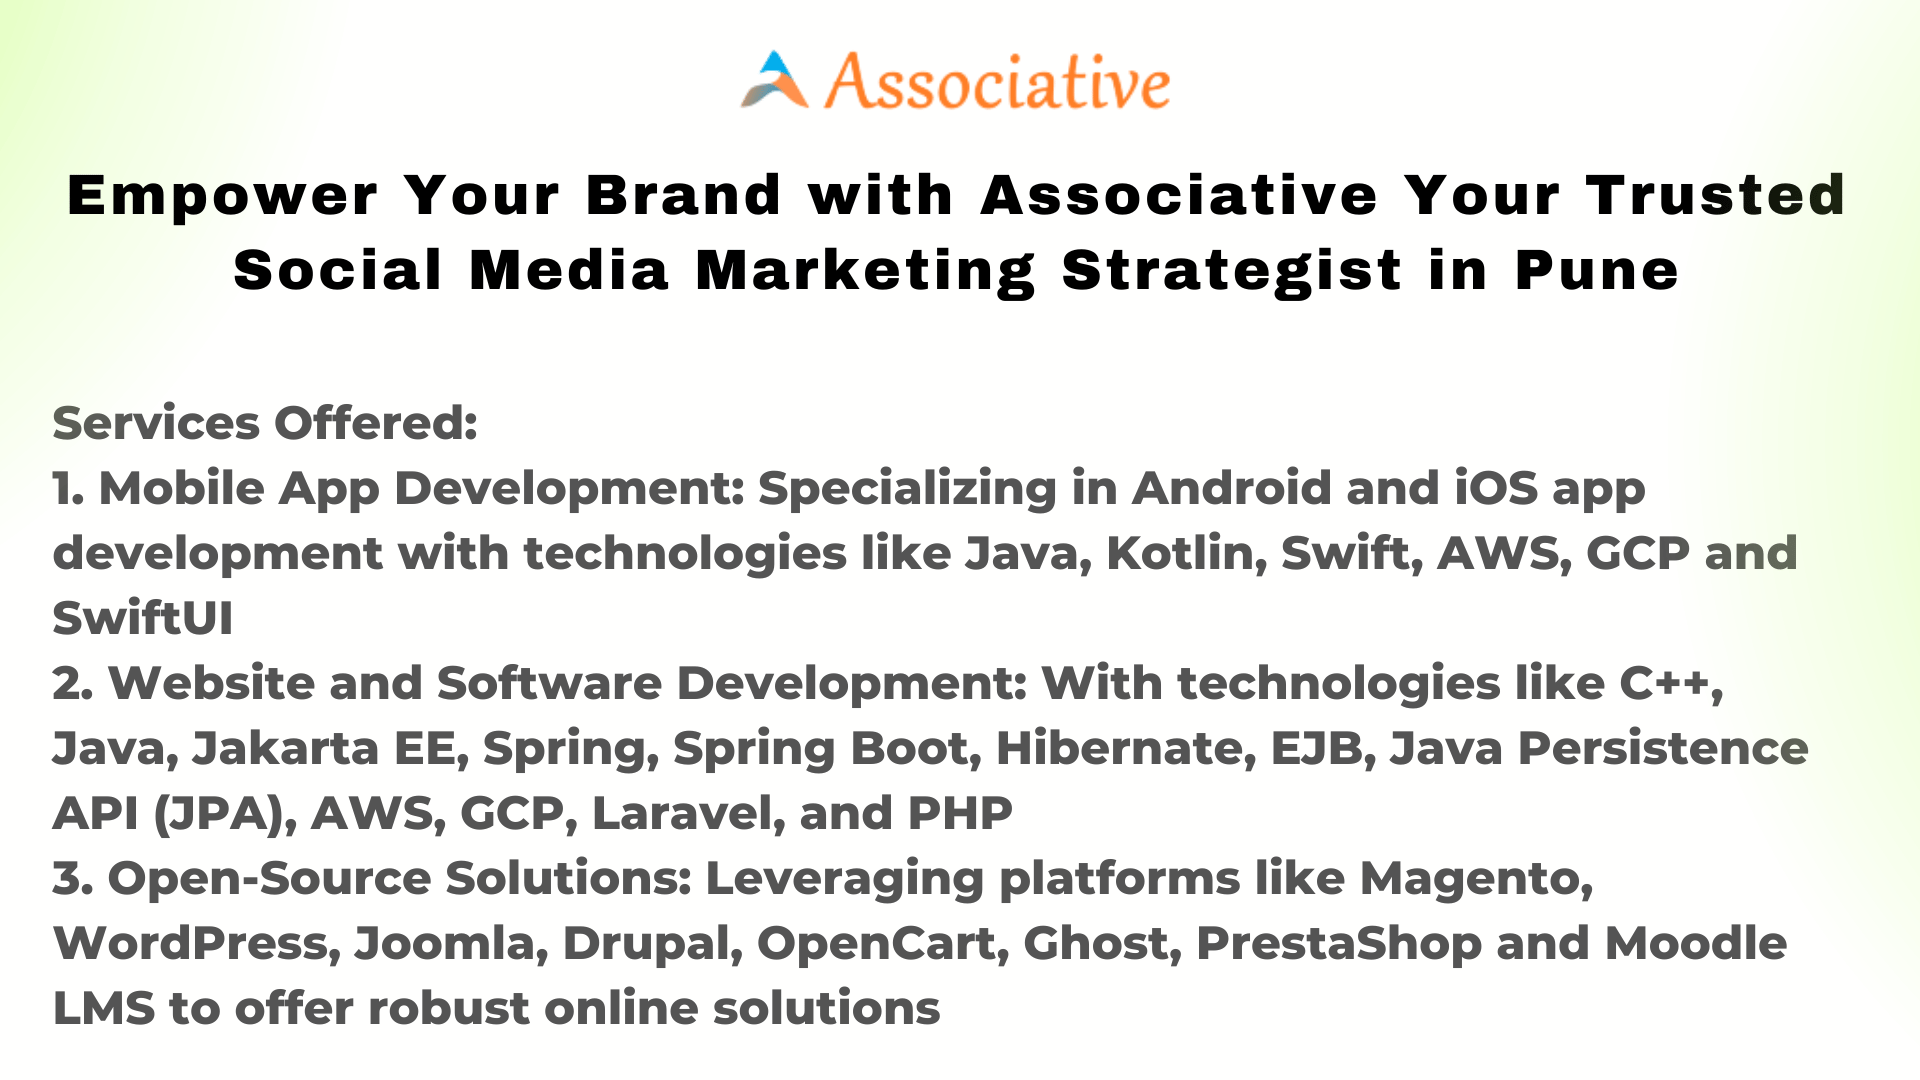 Empower Your Brand with Associative Your Trusted Social Media Marketing Strategist in Pune